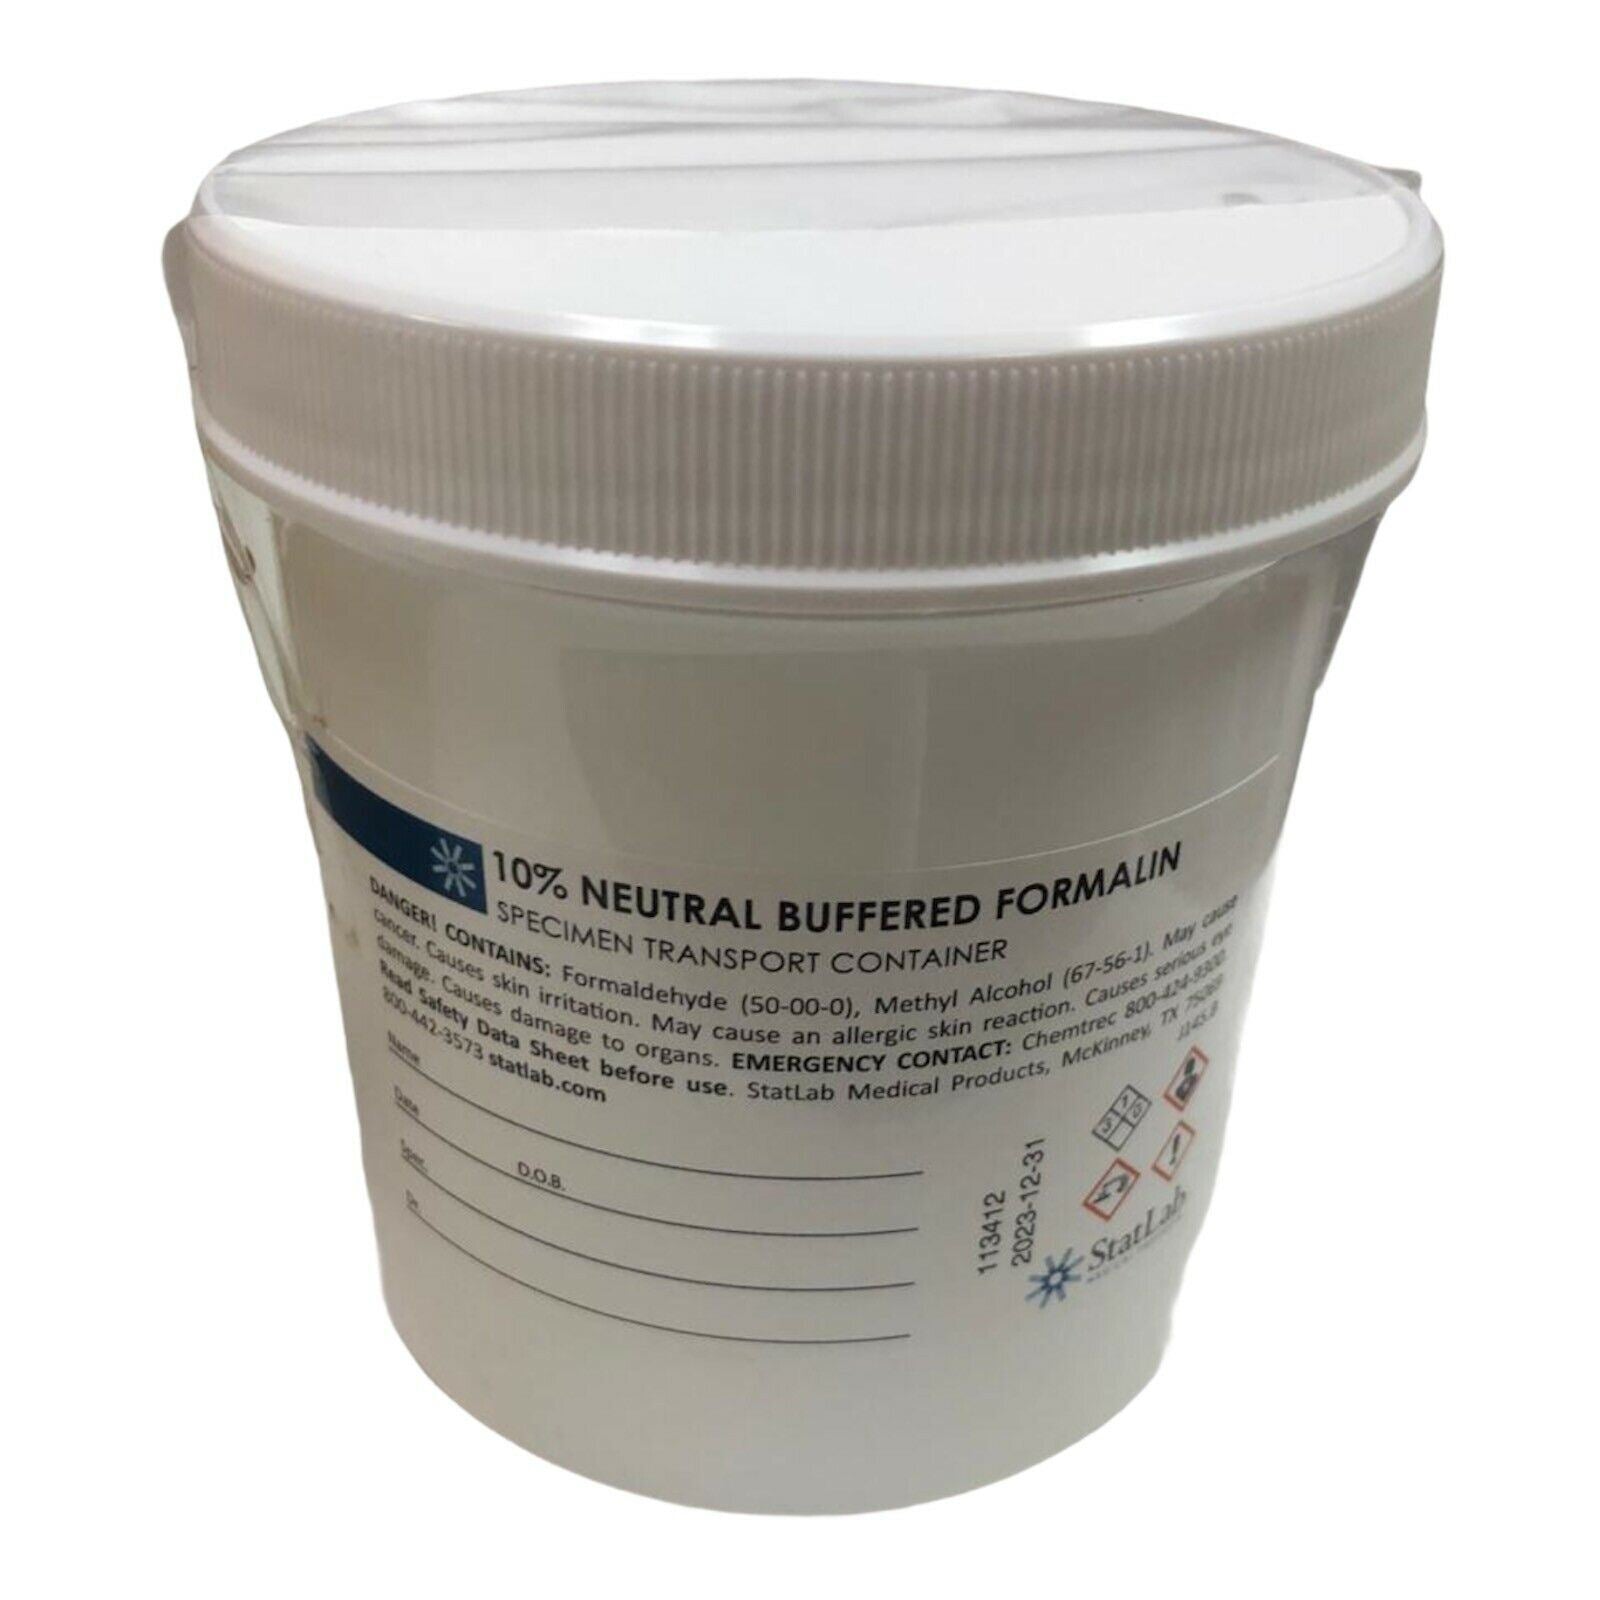 12 - 10% Neutral Buffered Formalin 500ml Specimen Transport Container | CEM-44 DIAGNOSTIC ULTRASOUND MACHINES FOR SALE